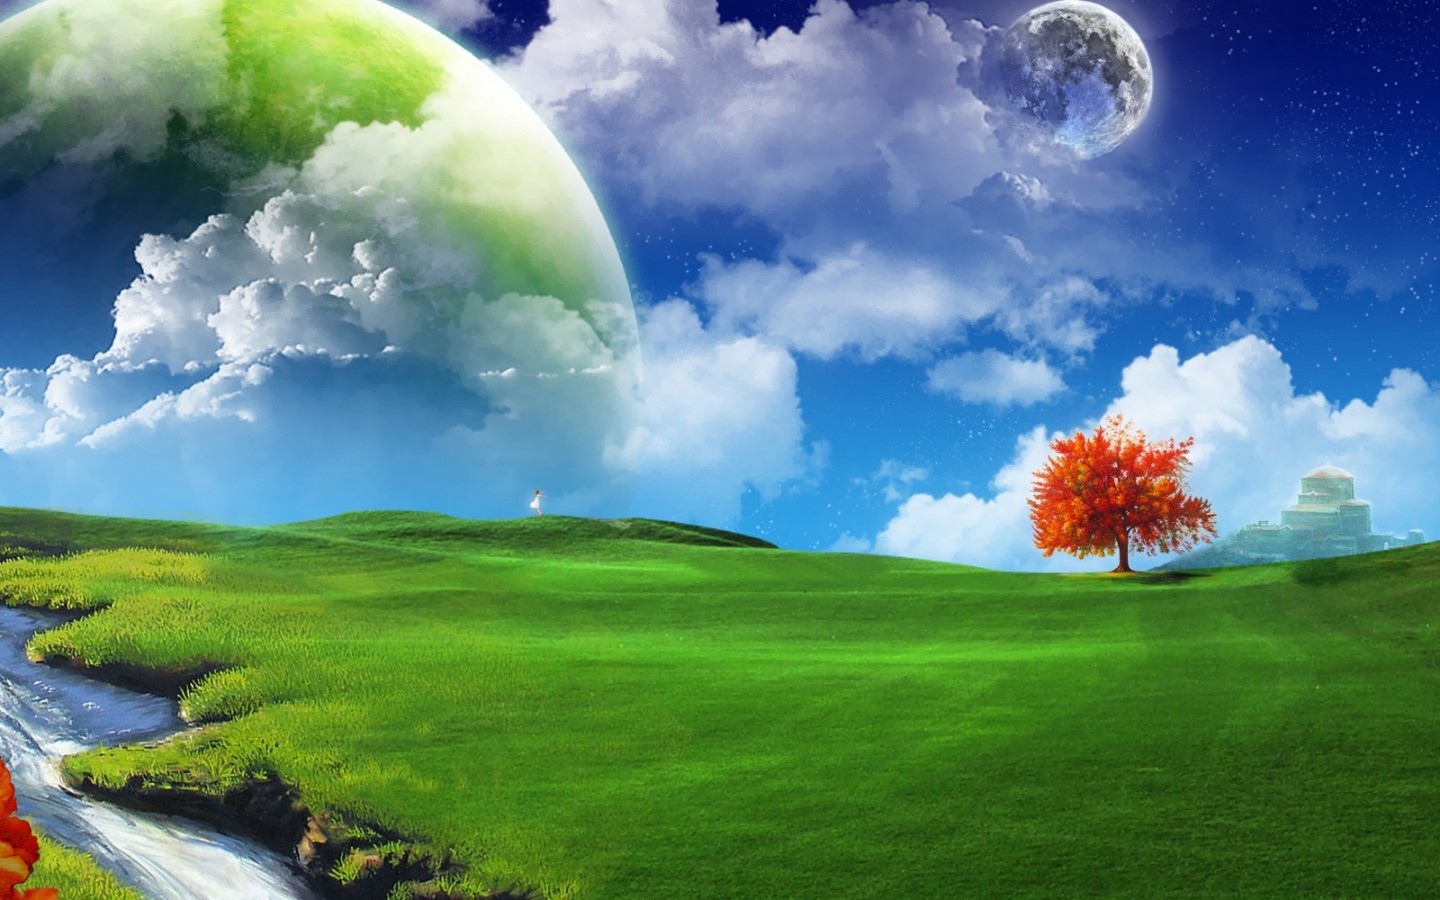 3d Nature wallpapers | New 3d nature wallpapers | Beautiful nature 3d ...